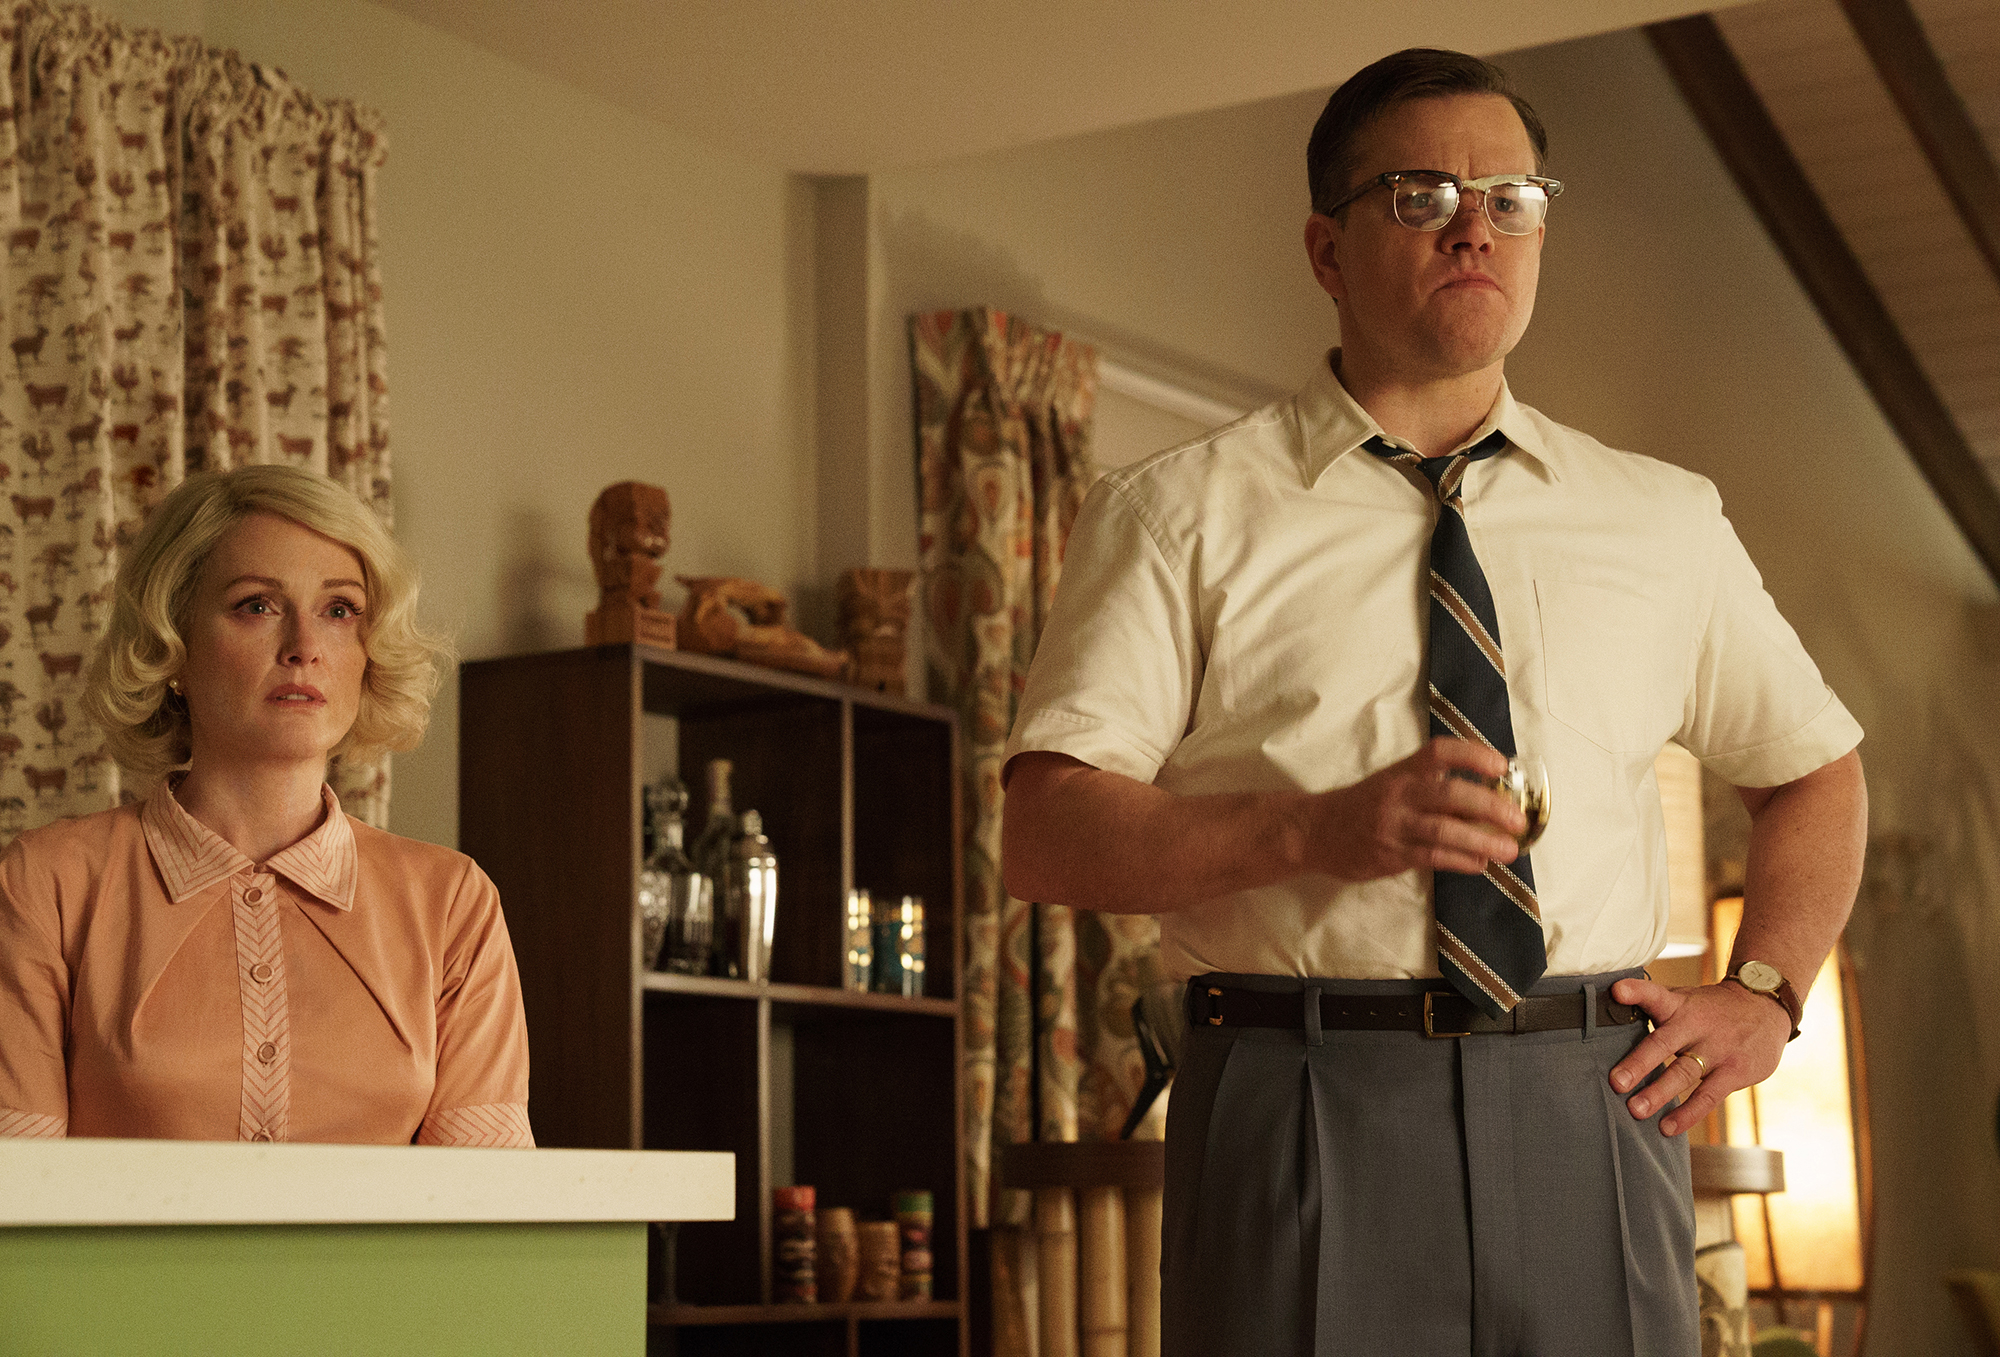 Left-to-right-Julianne-Moore-as-Margaret-and-Matt-Damon-as-Gardner-in-SUBURBICON-from-Paramount-Pictures-and-Black-Bear-Pictures.